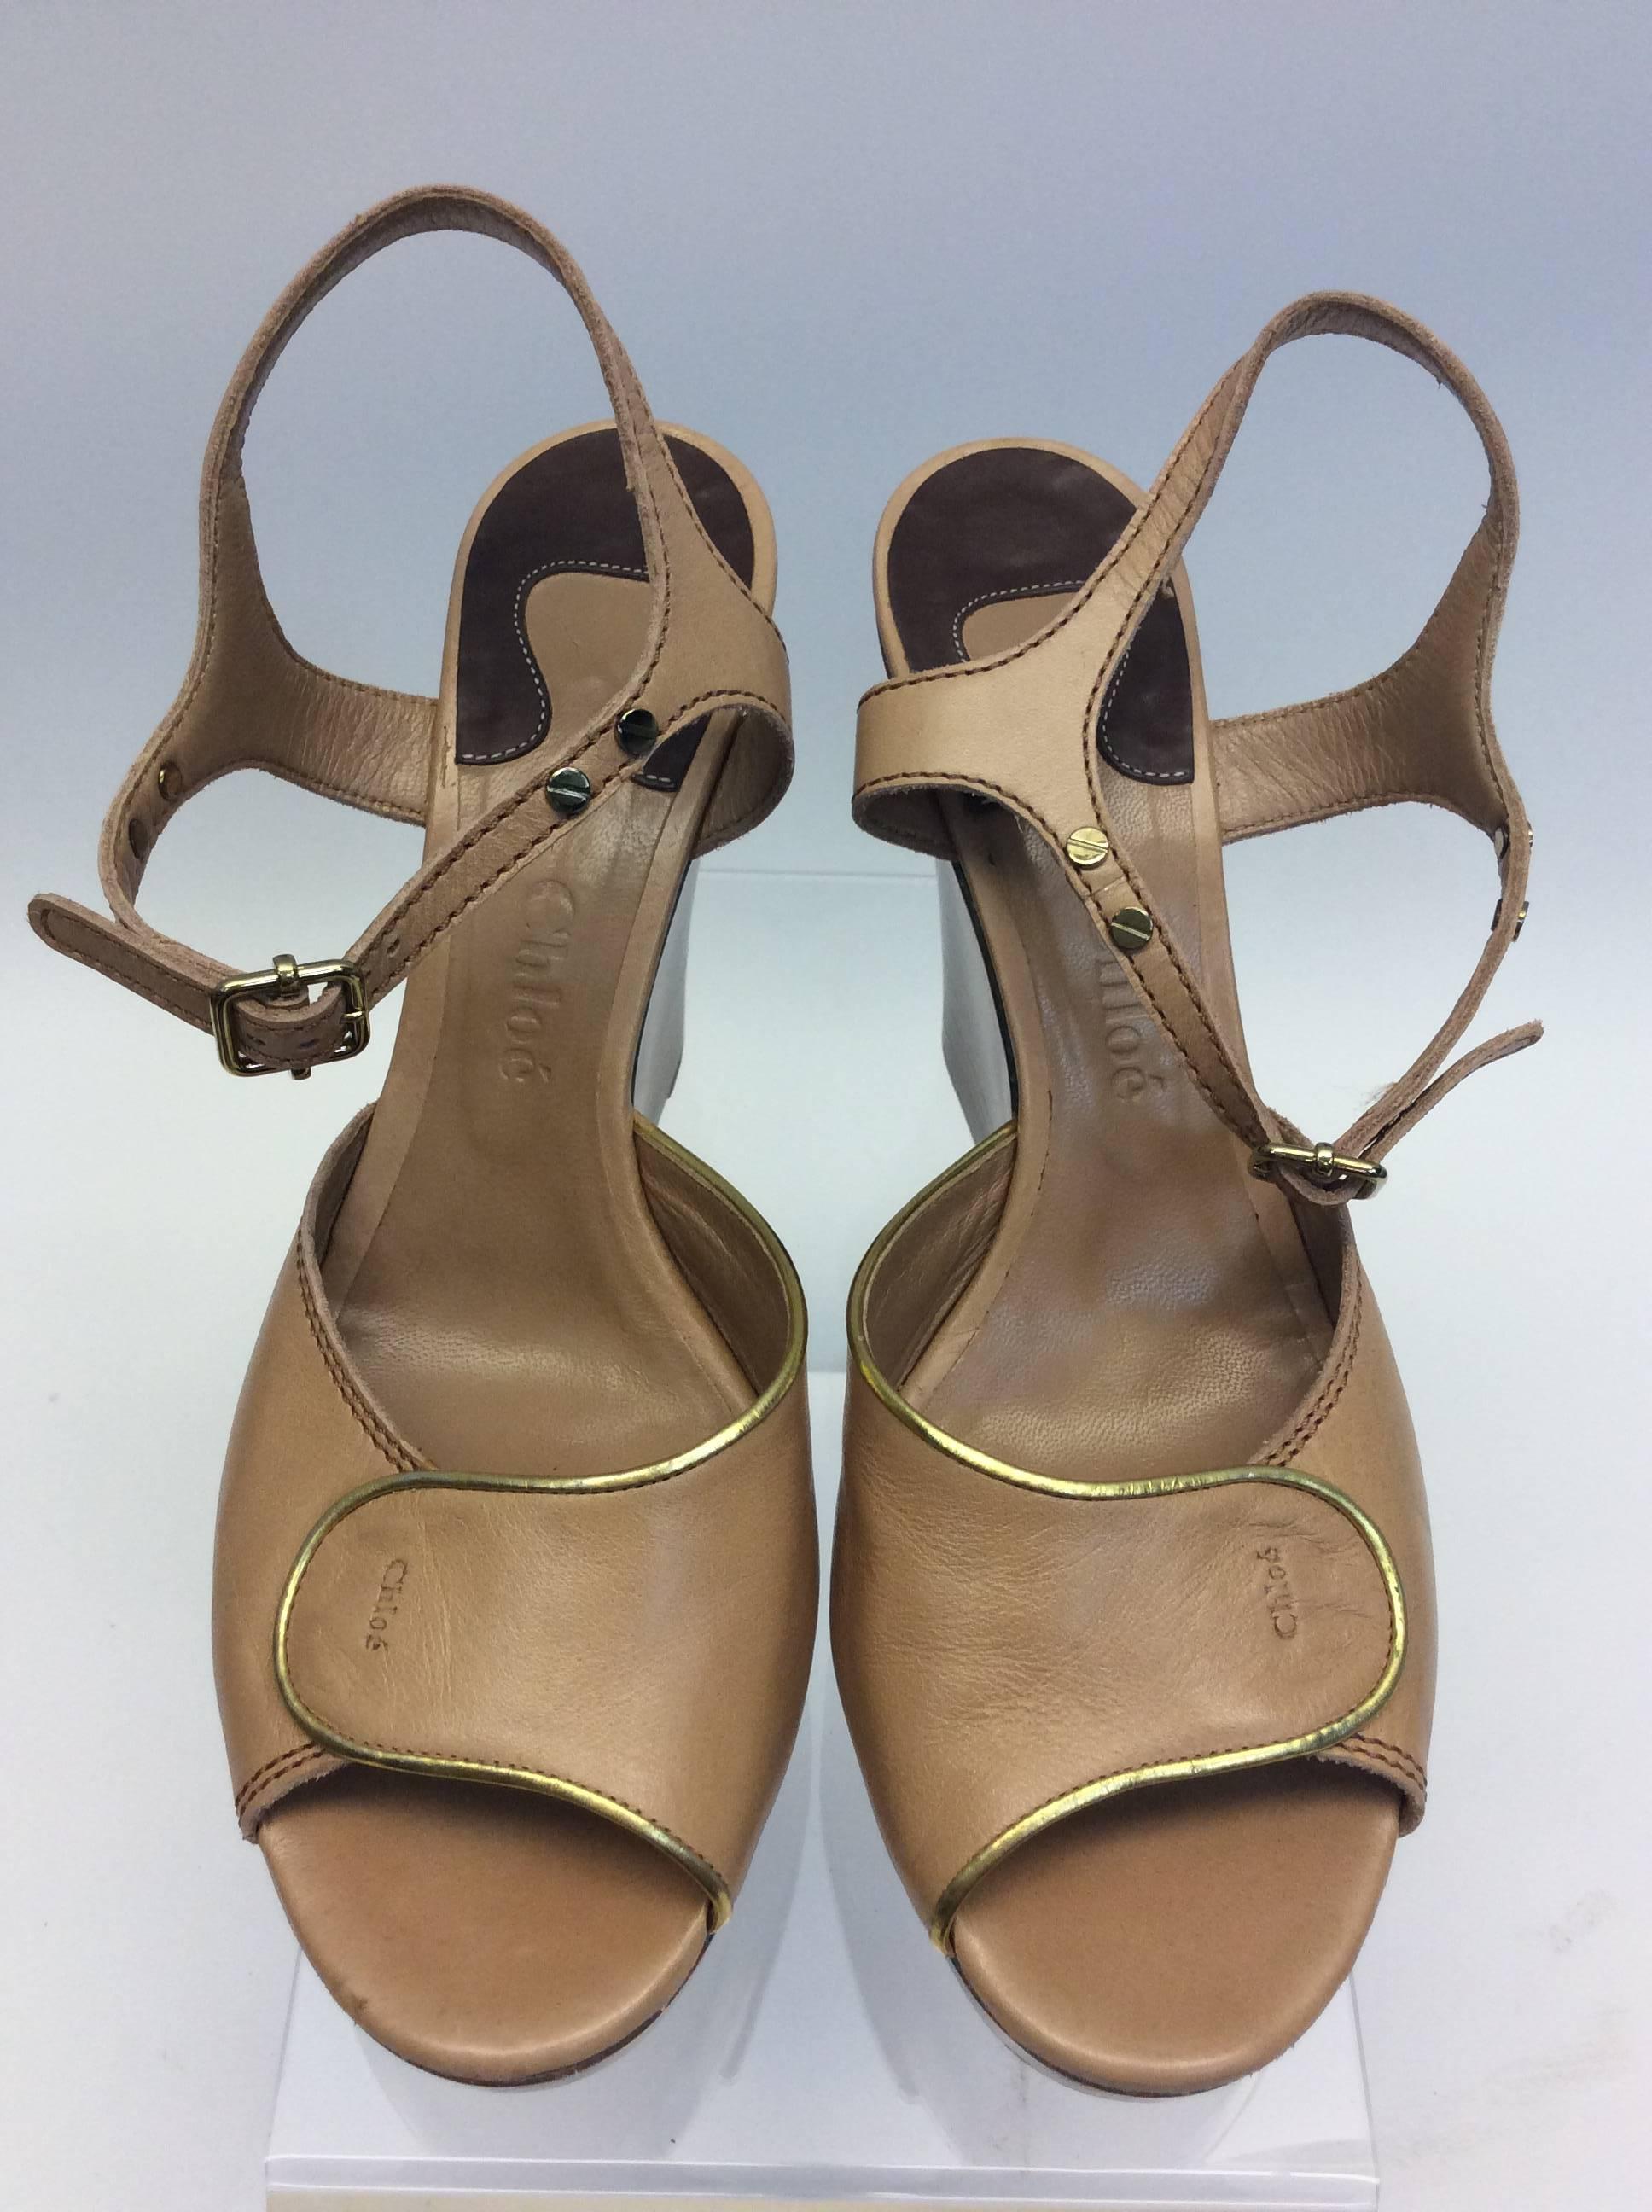 Women's Chloe Tan Leather Wedge For Sale